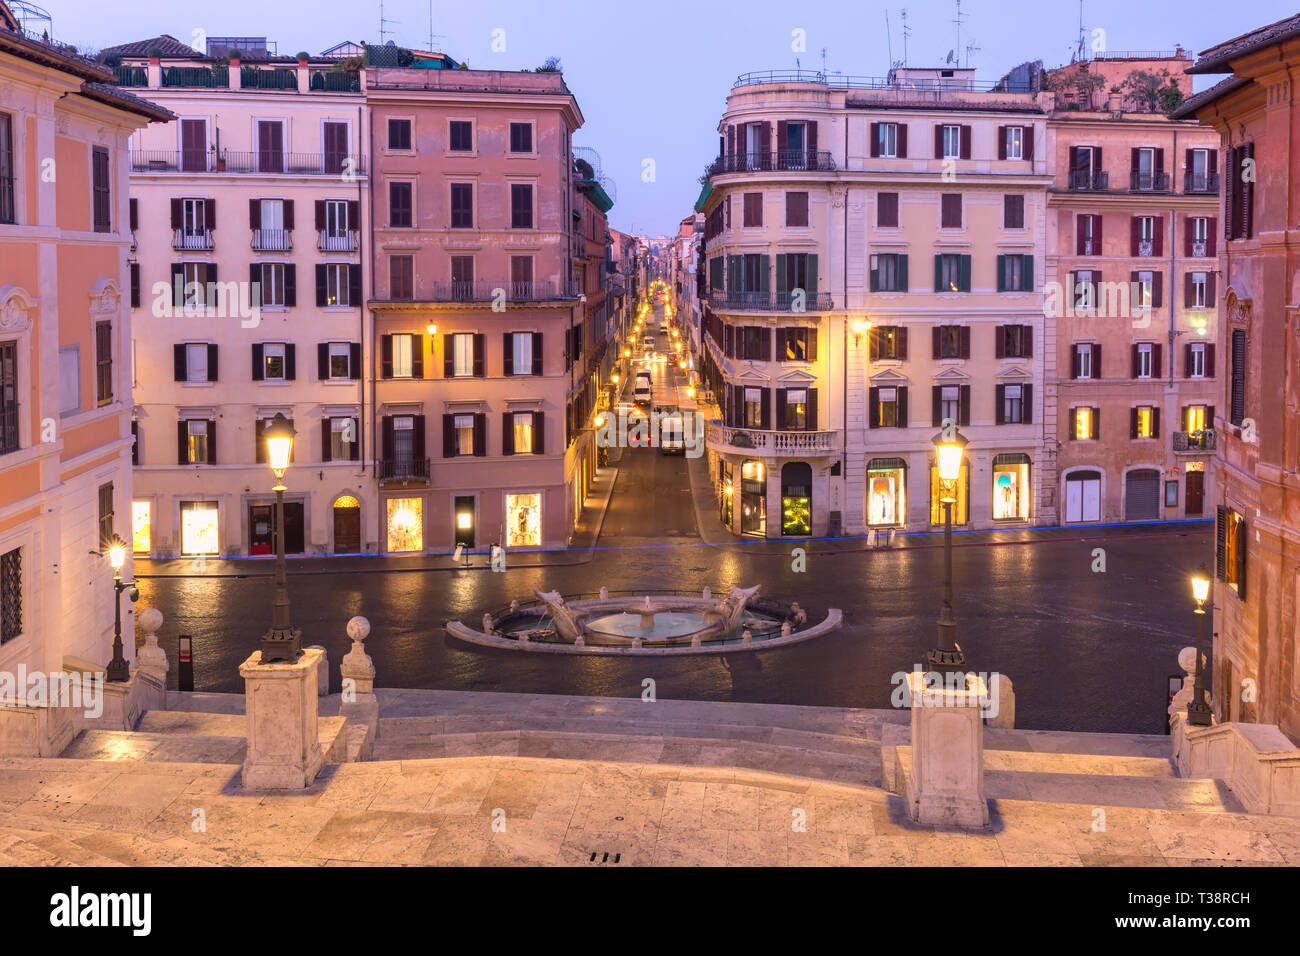 Piazza di Spagna and the Early Baroque fountain called Fontana della Barcaccia or Fountain of the ugly Boat during morning blue hour, Rome, Italy. Stock Photo